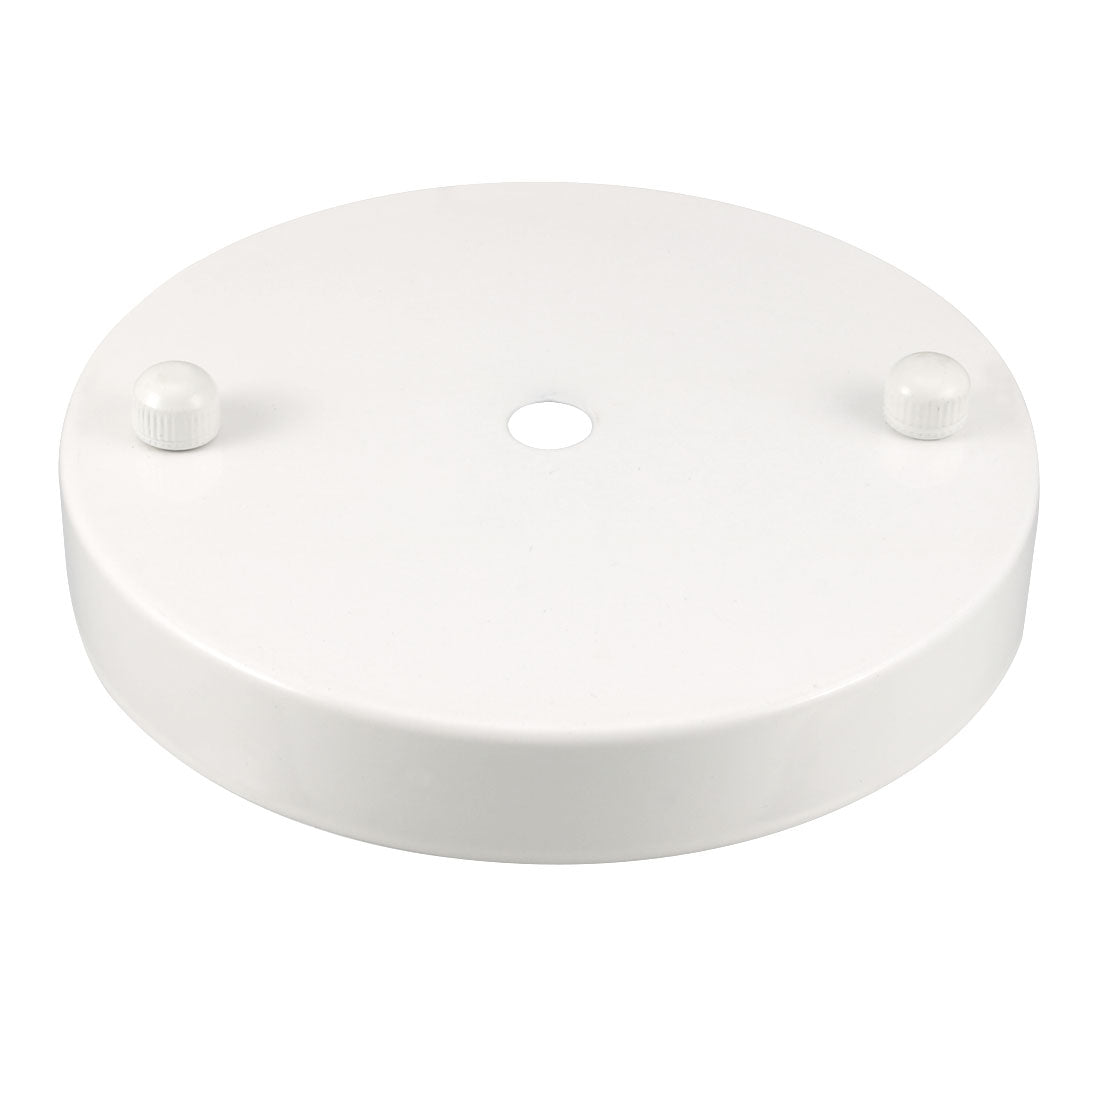 uxcell Uxcell Retro Ceiling Light Plate Pointed Base Chassis Disc Pendant Accessories 120mmx20mm White w Screw